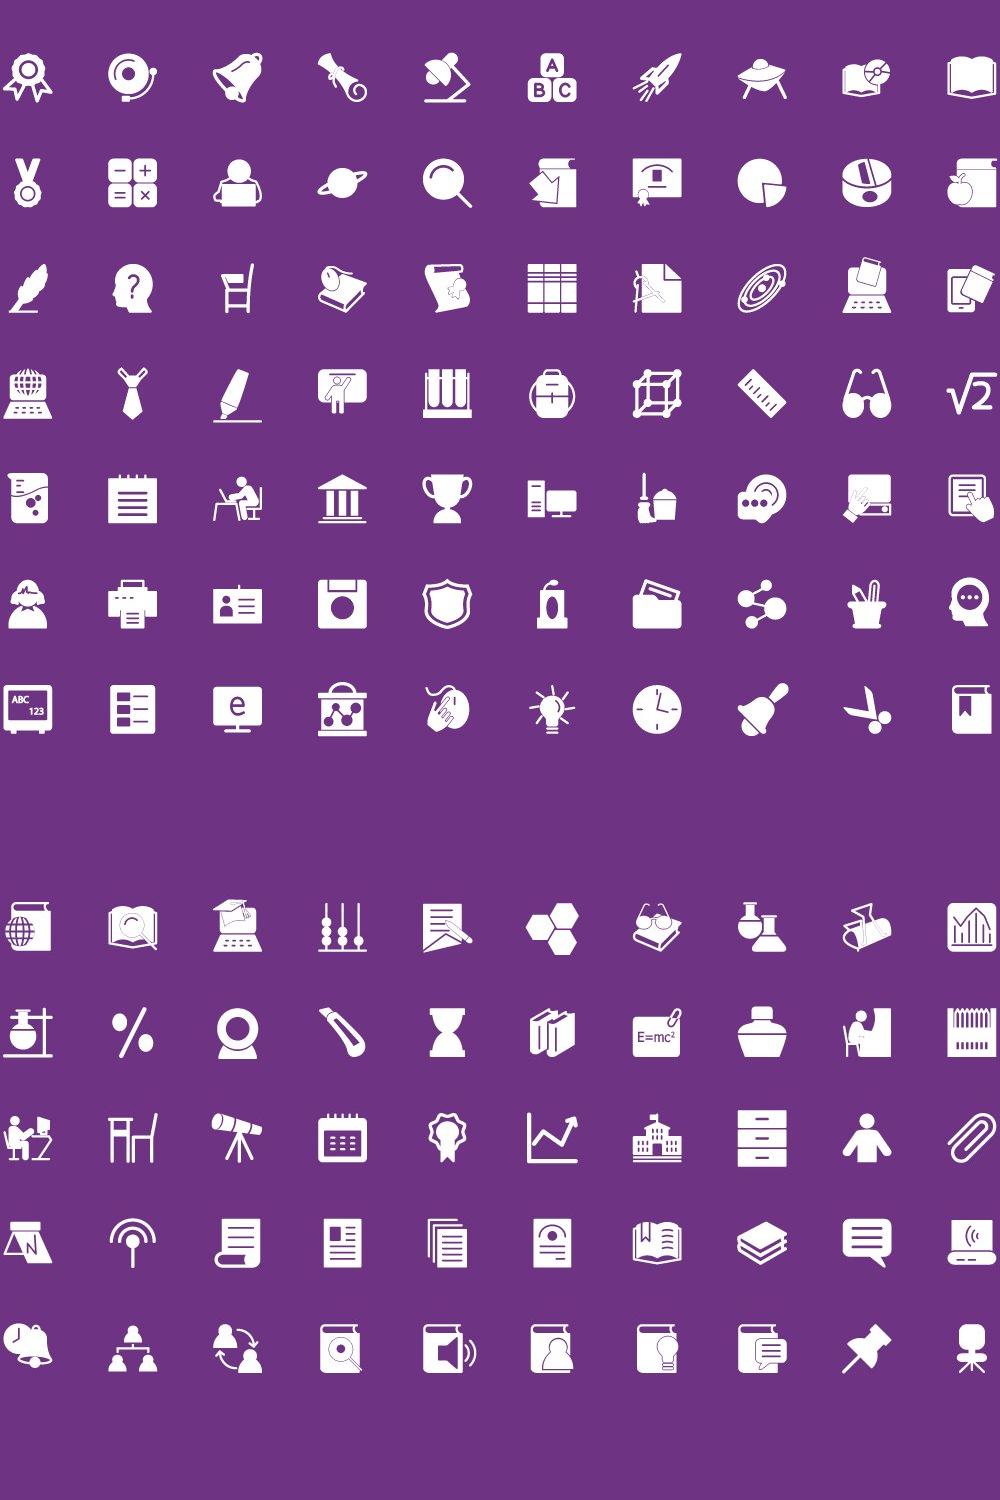 Illustrations 200 education vector icons of pinterest.